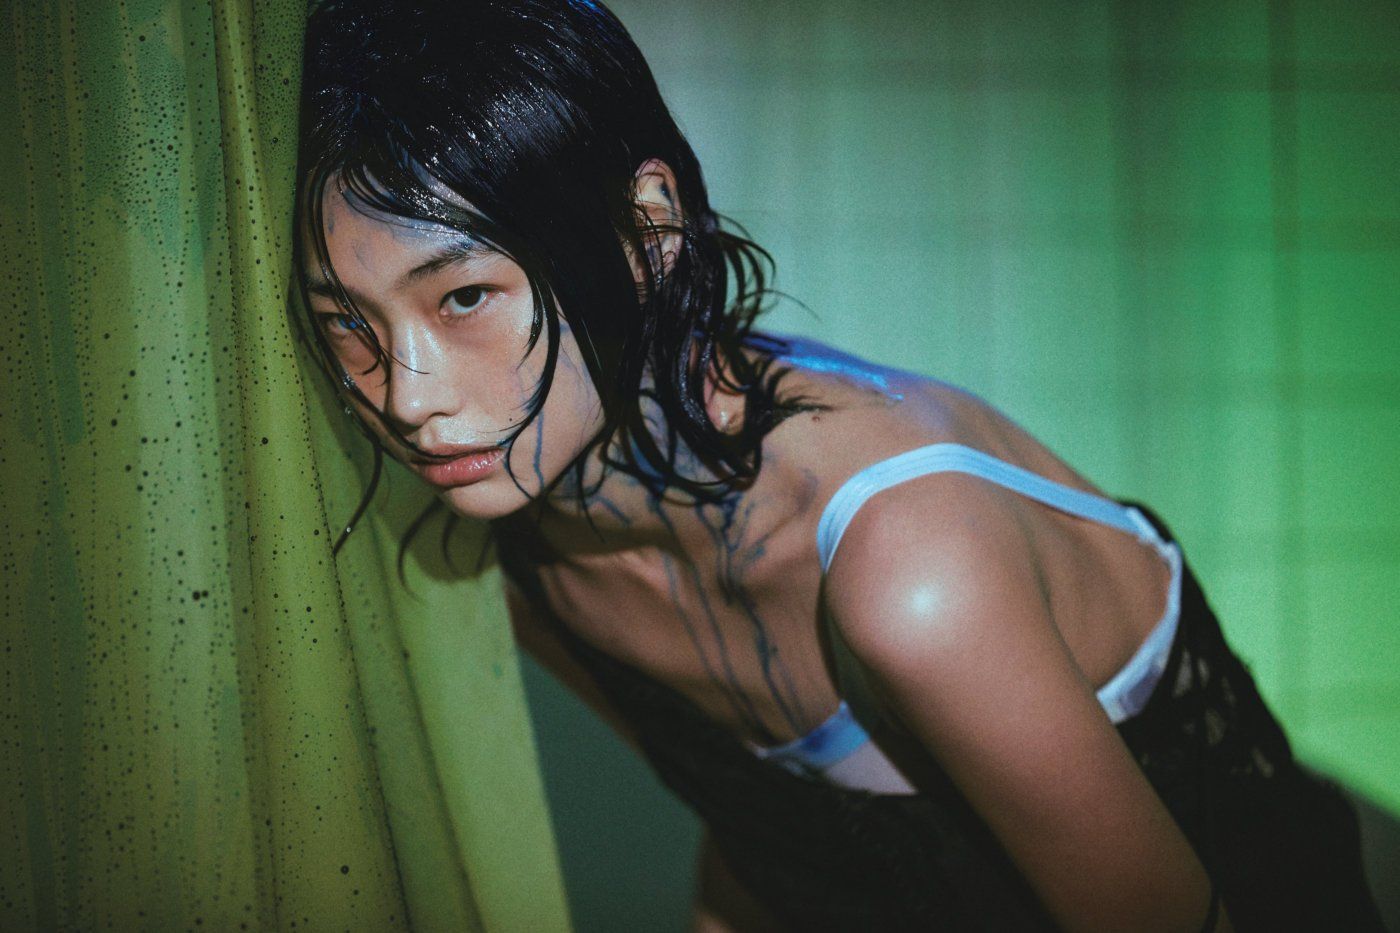 Hoyeon Jung by Mok Jungwook for W Magazine Korea May 2021